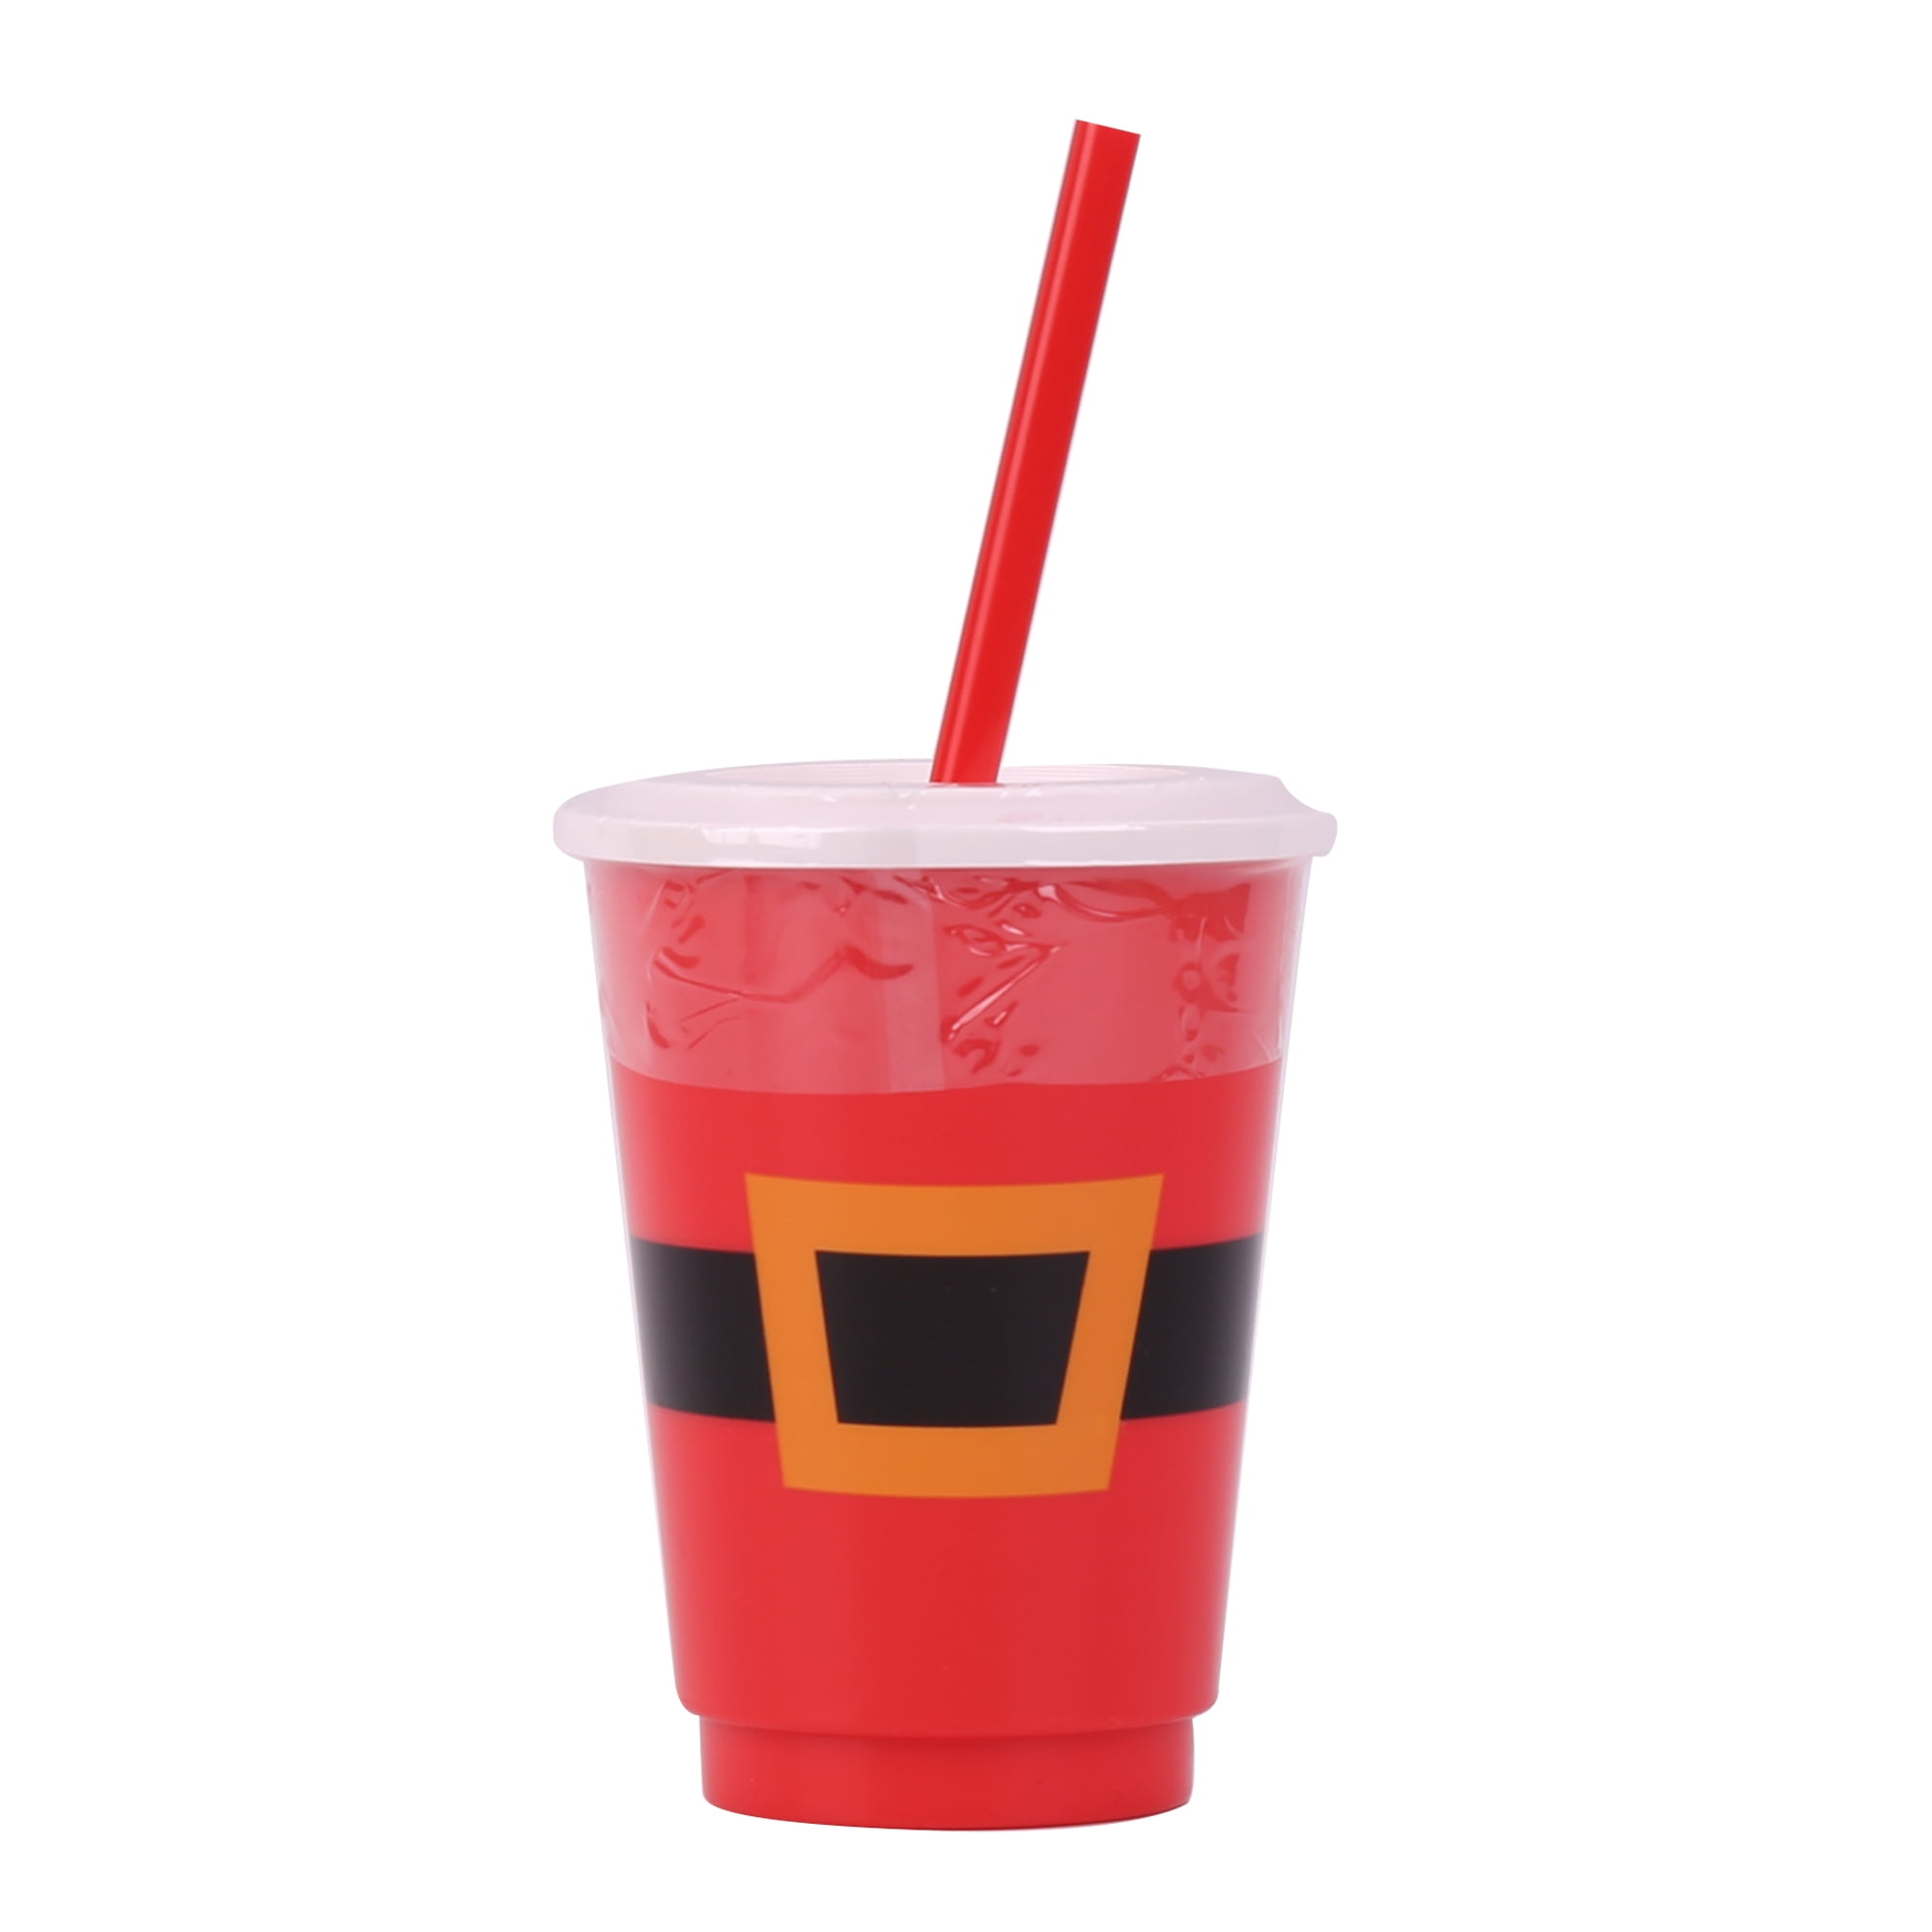 Holiday Time Belt Cup with Lid, Red Color with Belt Pattern, 13oz, Unisex, Cup with Straw,Plastic